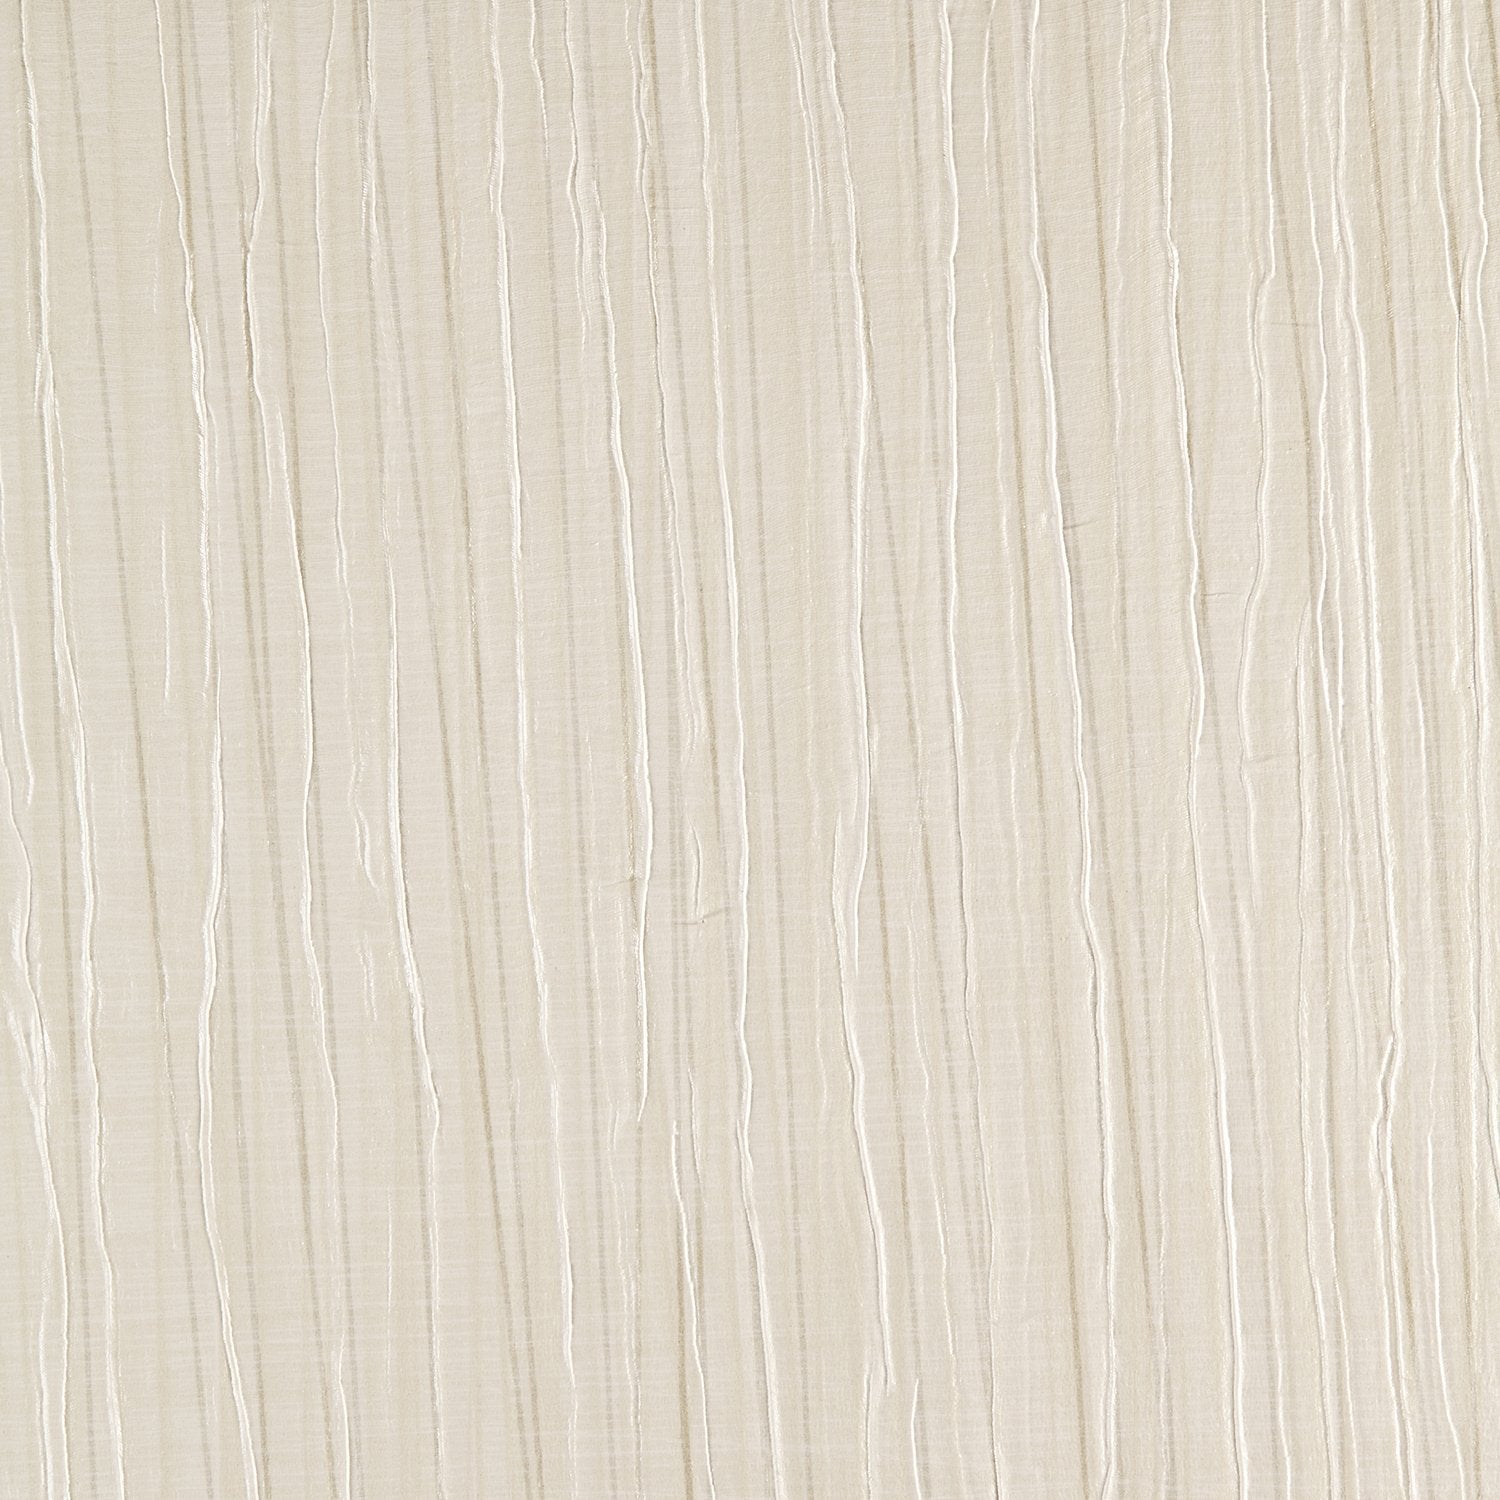 Vogue Pleat - Y47005 - Wallcovering - Vycon - Kube Contract